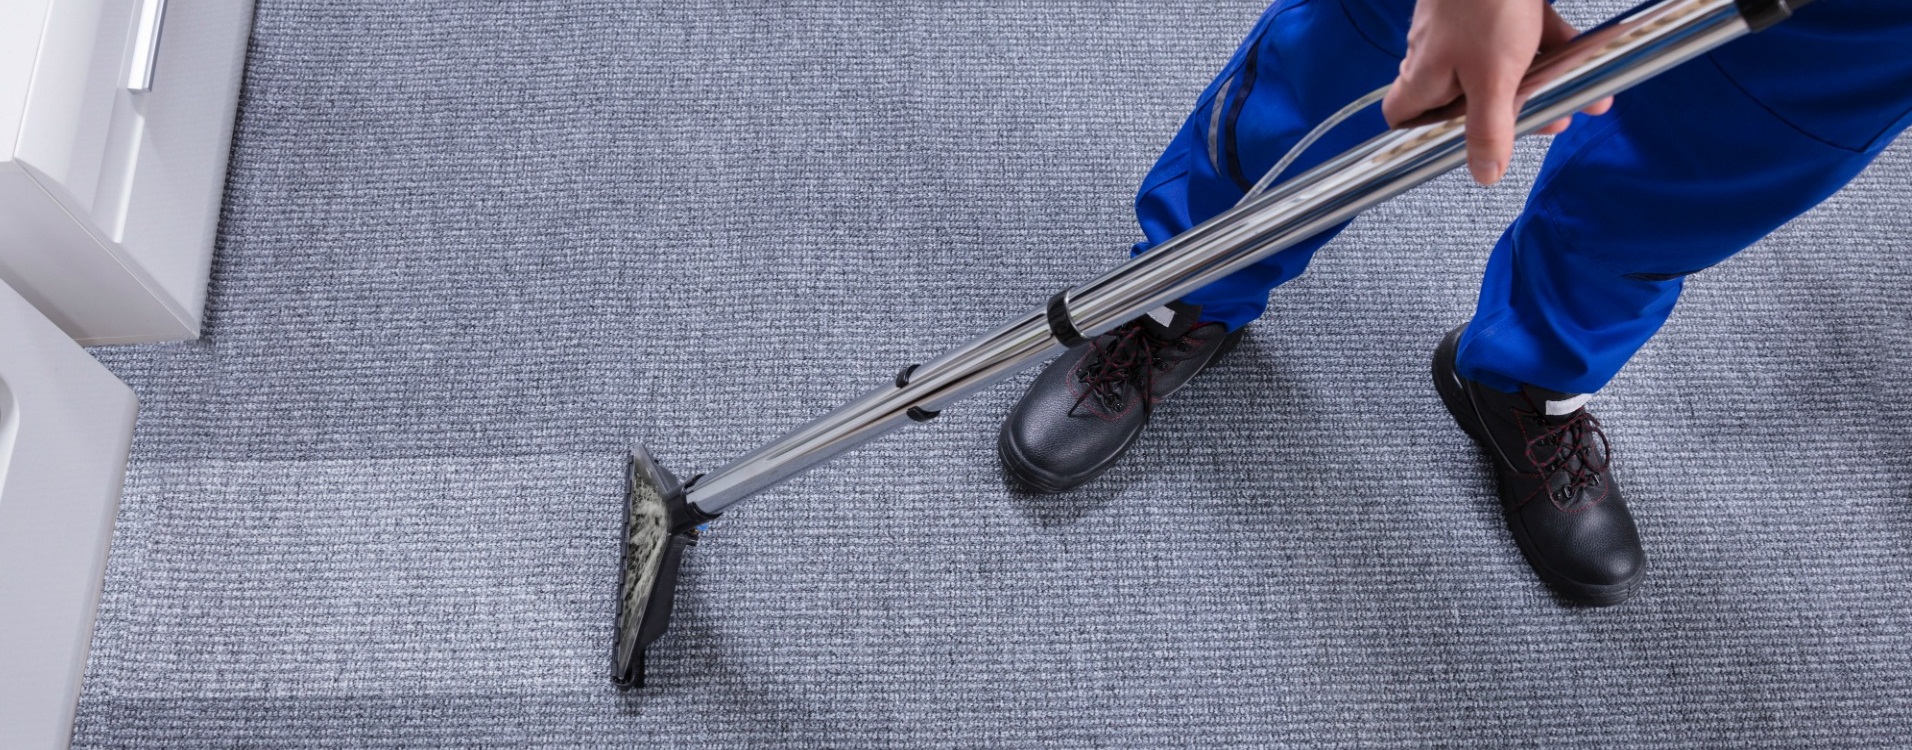 How Professional Carpet Cleaning Is Effective In Smoke Smell? | Total ...